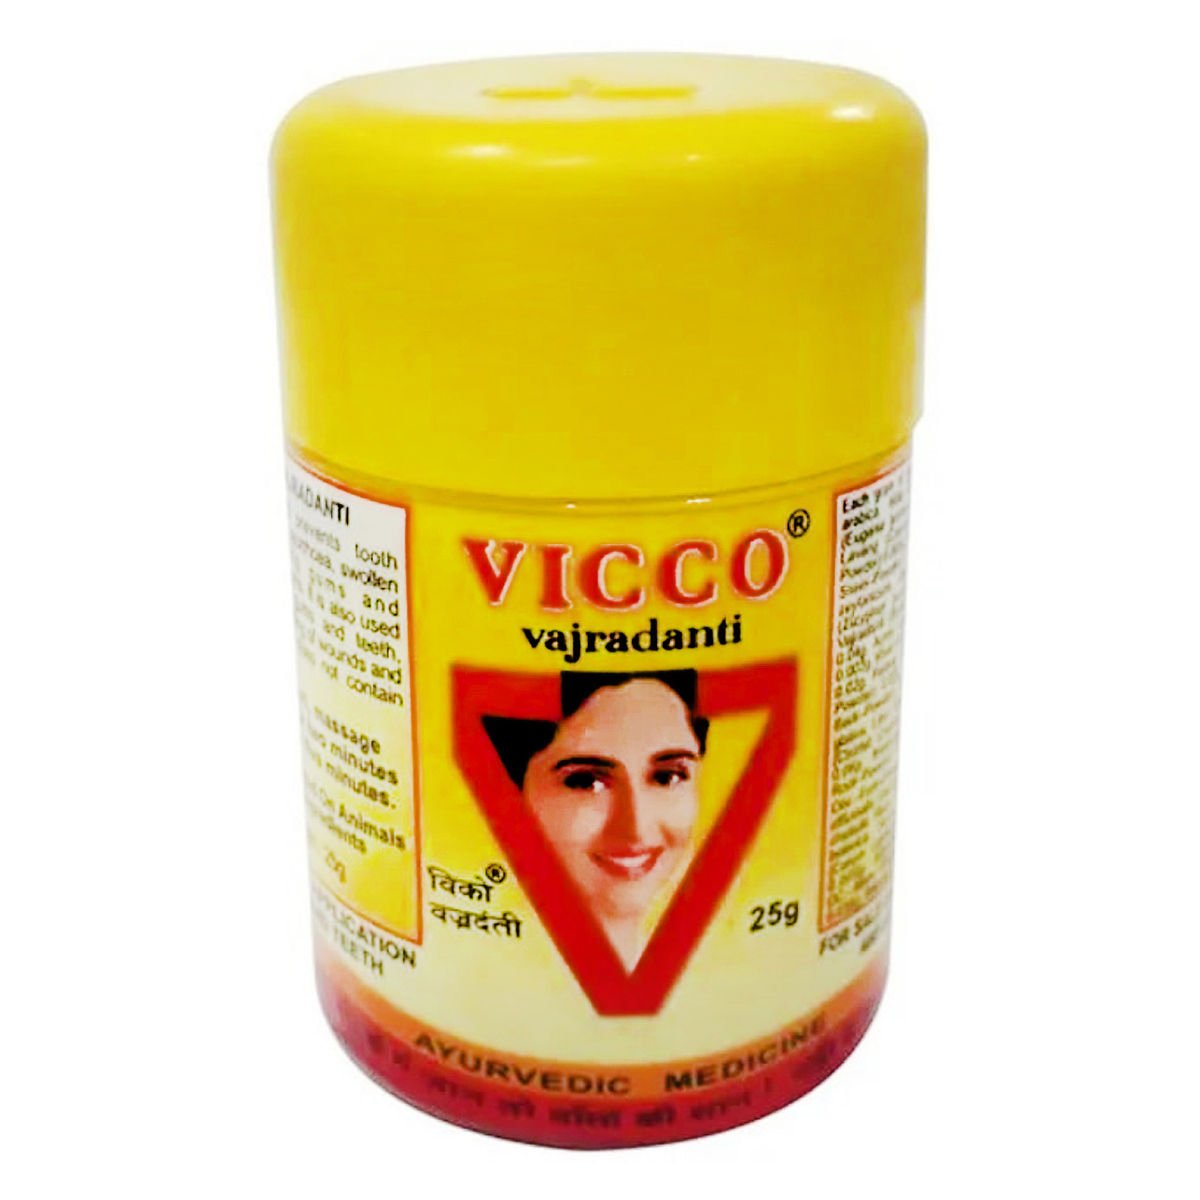 Vicco Power 25Gm, Pack of 1 